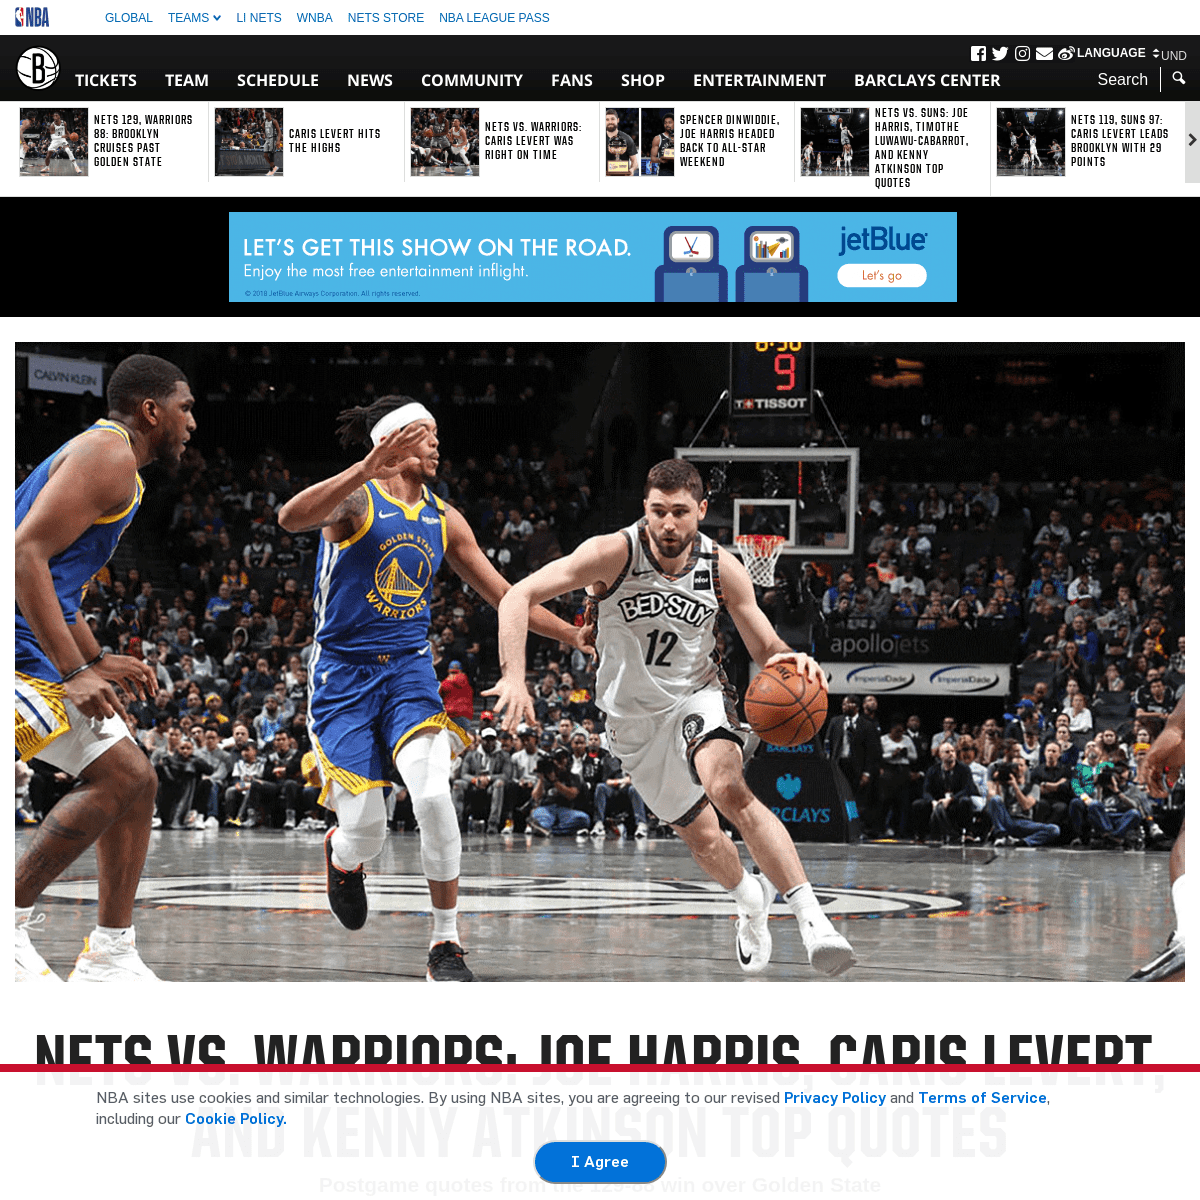 A complete backup of www.nba.com/nets/news/quotes/2020/02/05/nets-vs-warriors-joe-harris-caris-levert-and-kenny-atkinson-top-quo